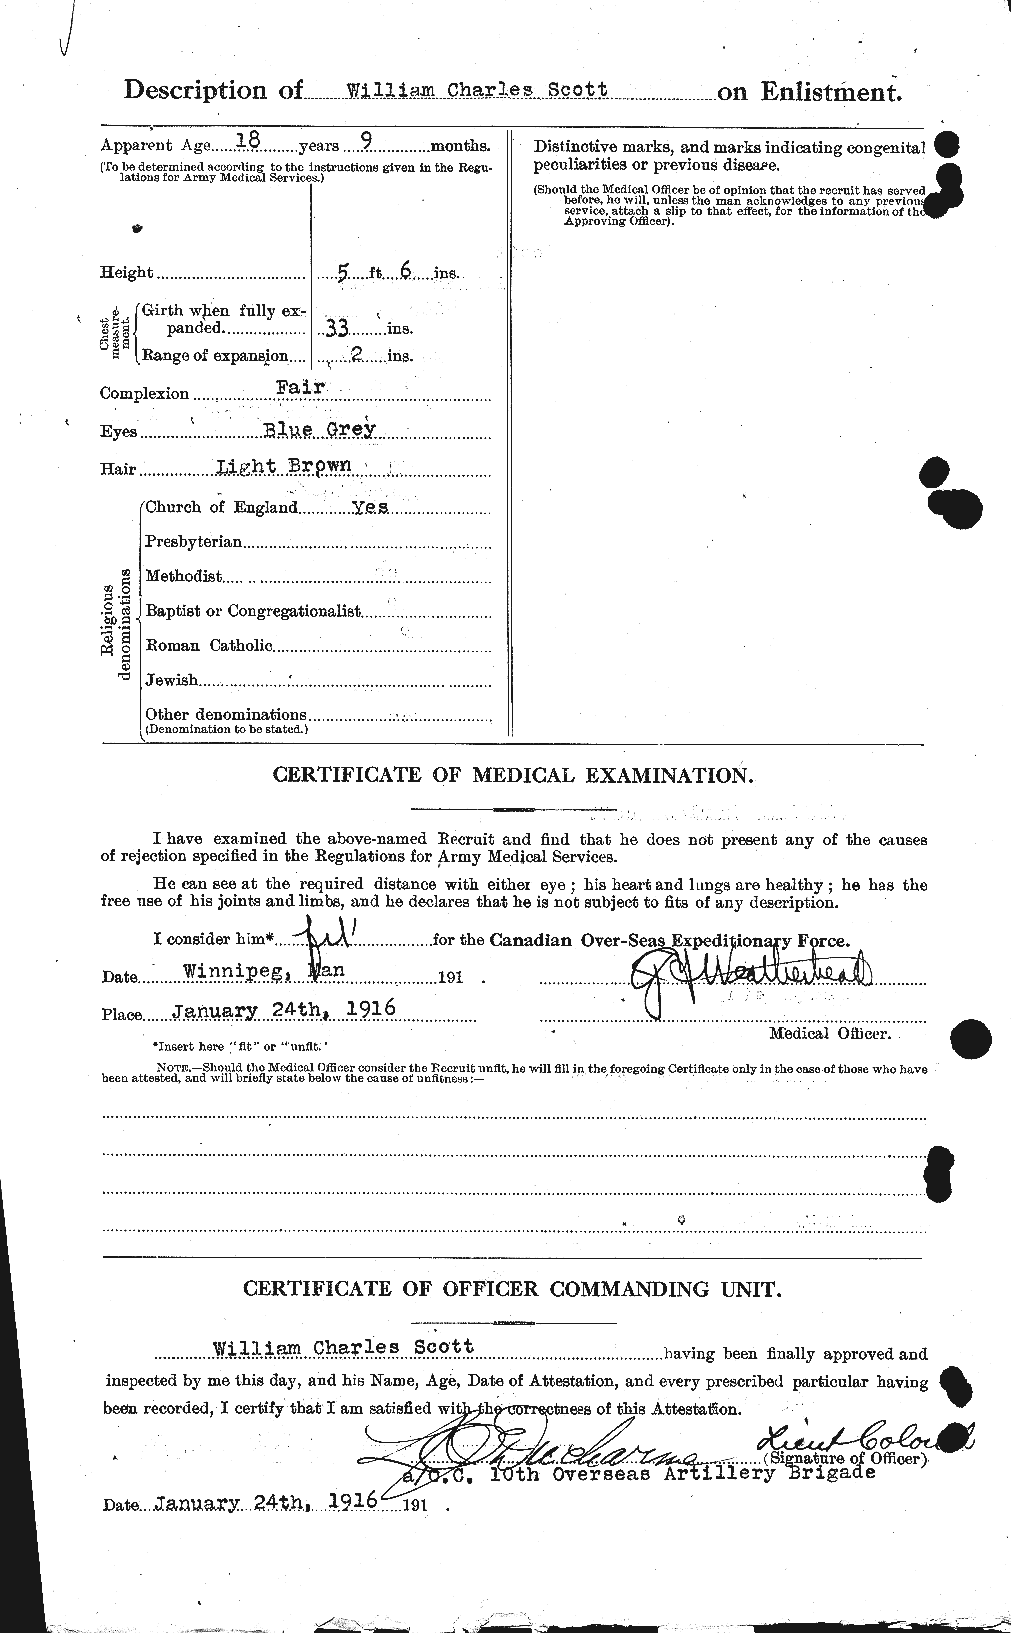 Personnel Records of the First World War - CEF 087044a